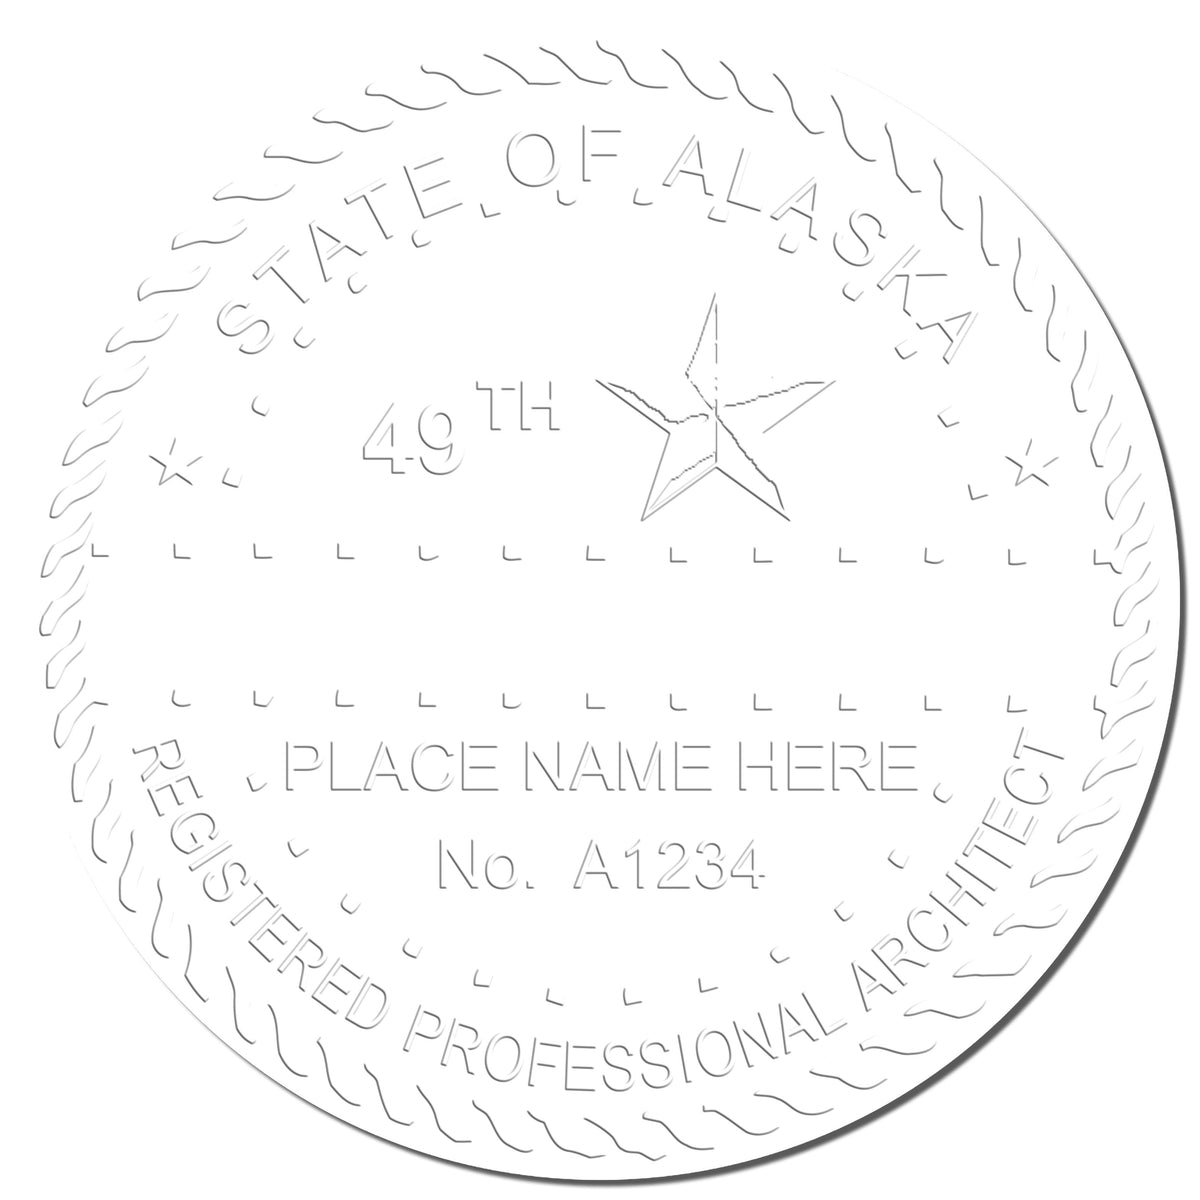 This paper is stamped with a sample imprint of the Gift Alaska Architect Seal, signifying its quality and reliability.